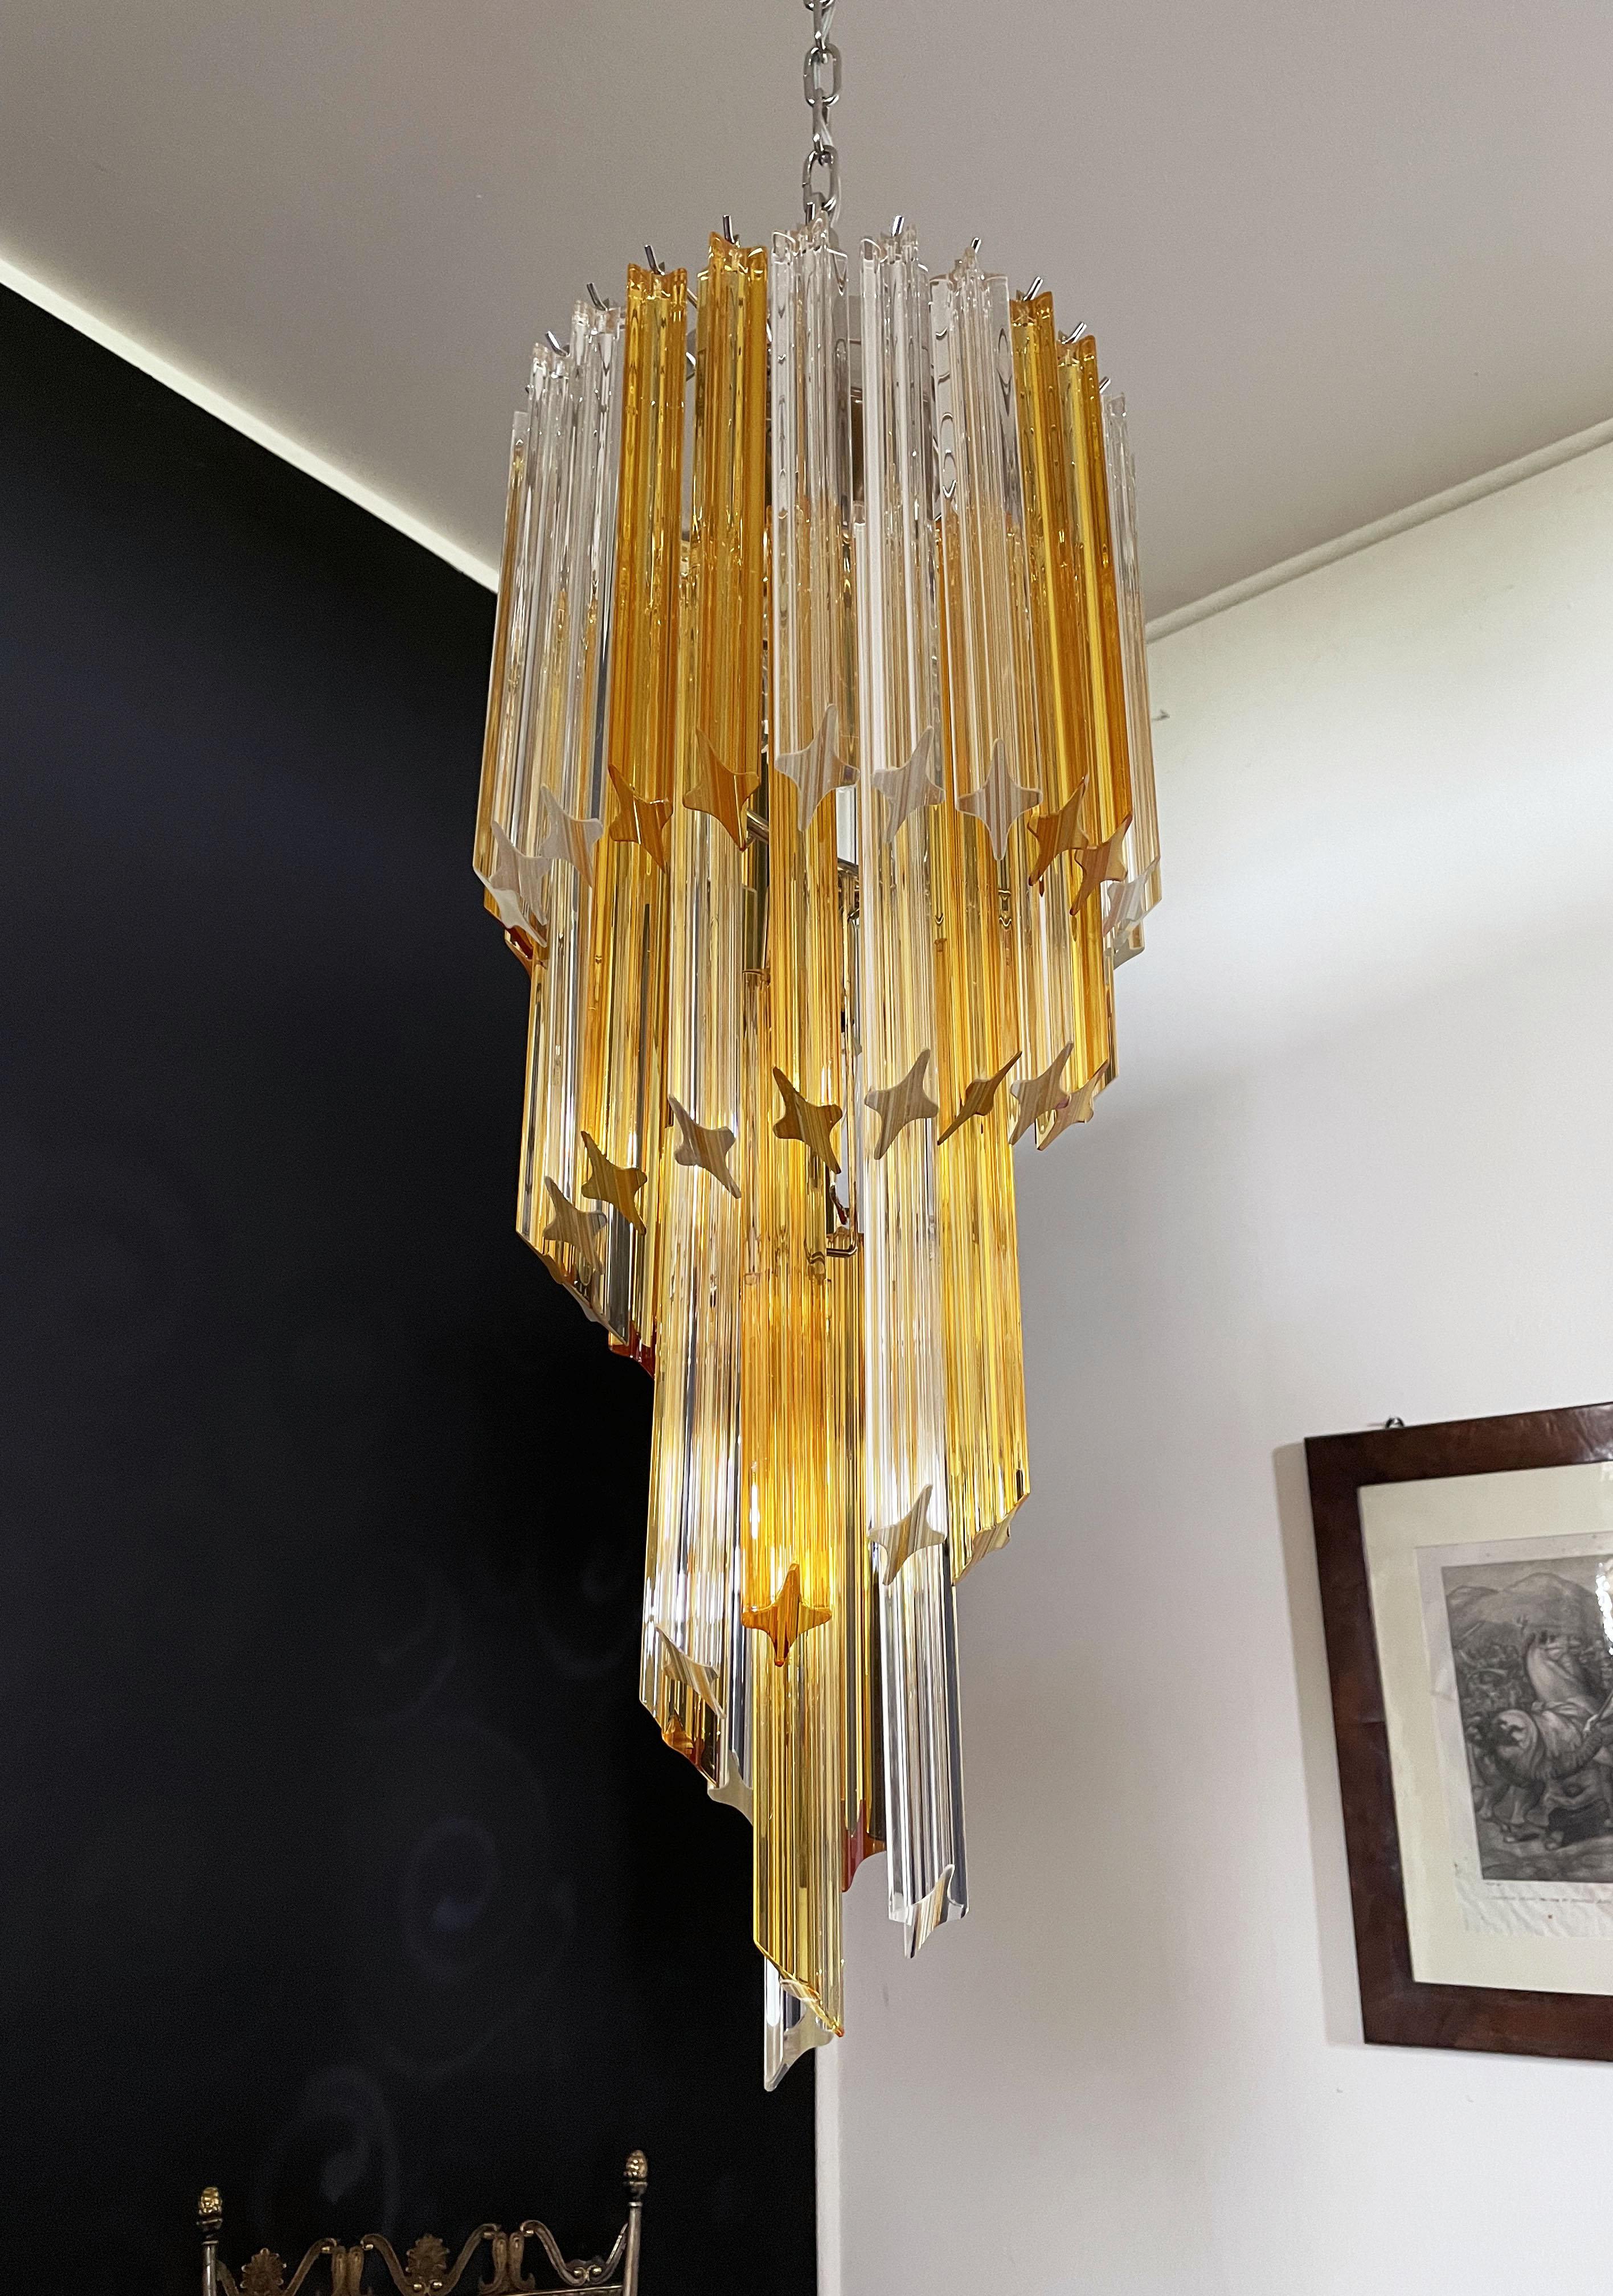 Blown Glass Murano Vintage Chandelier – 54 Quadriedri Prisms Transparent and Amber For Sale